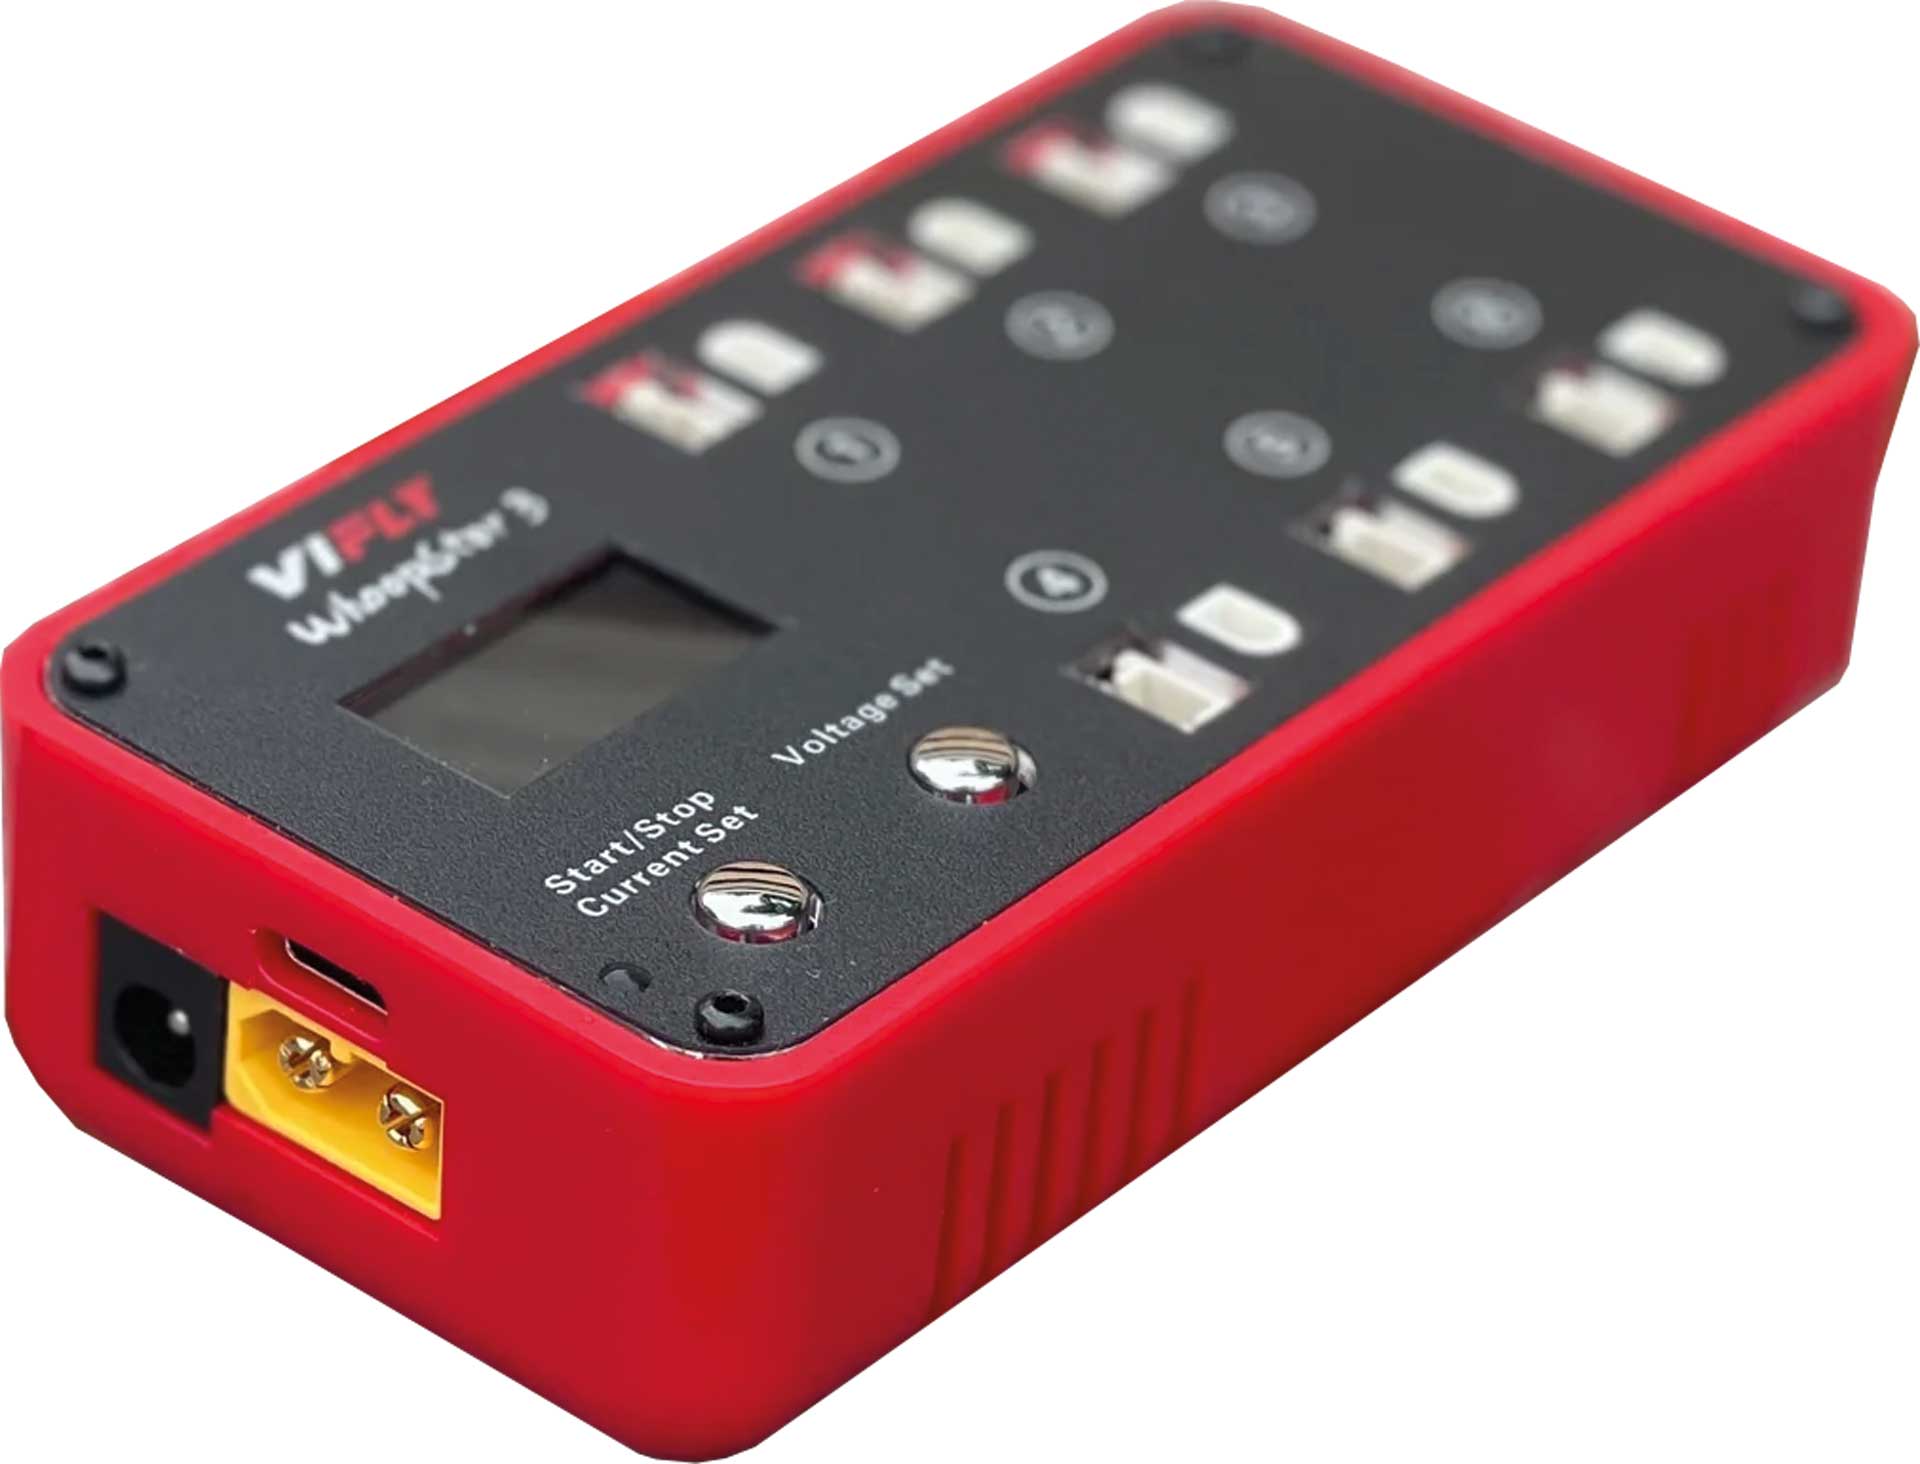 VIFLY WhoopStor 3 1S Red Battery charger and Discharger with PH2.0 , BT2.0 connections